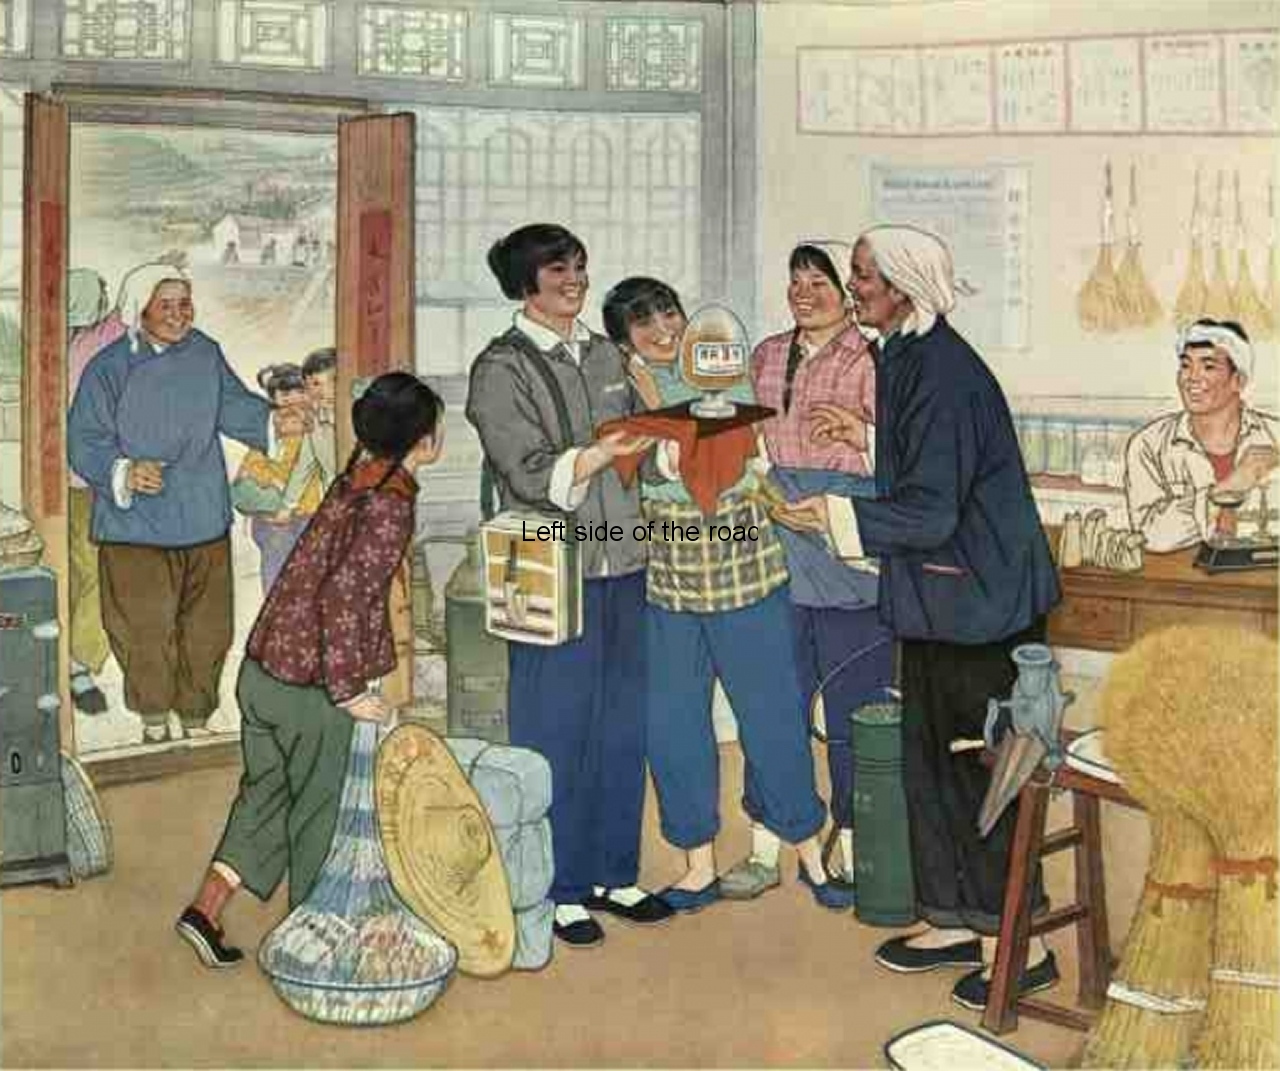 Chinese Revolutionary Socialist Realist Posters - 1975